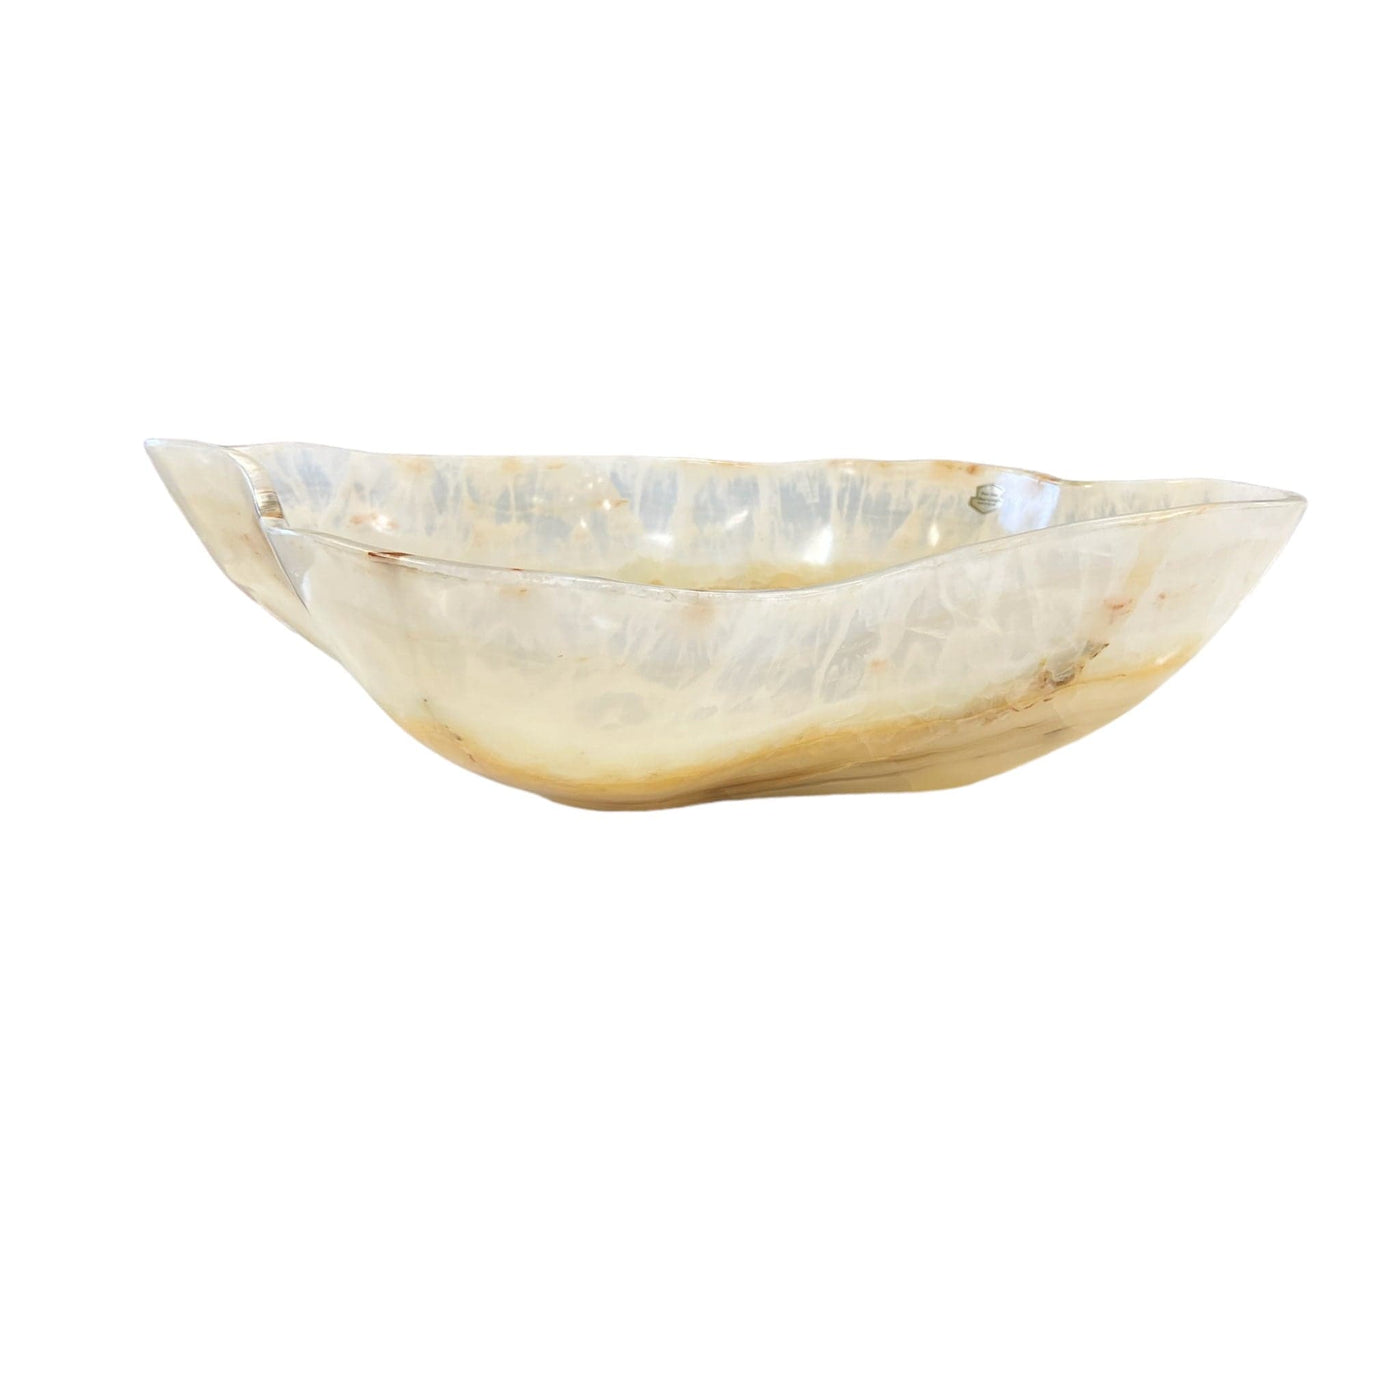 Large mexican onyx bowl displayed on a white background. It is shades of cream, tan, and brown.